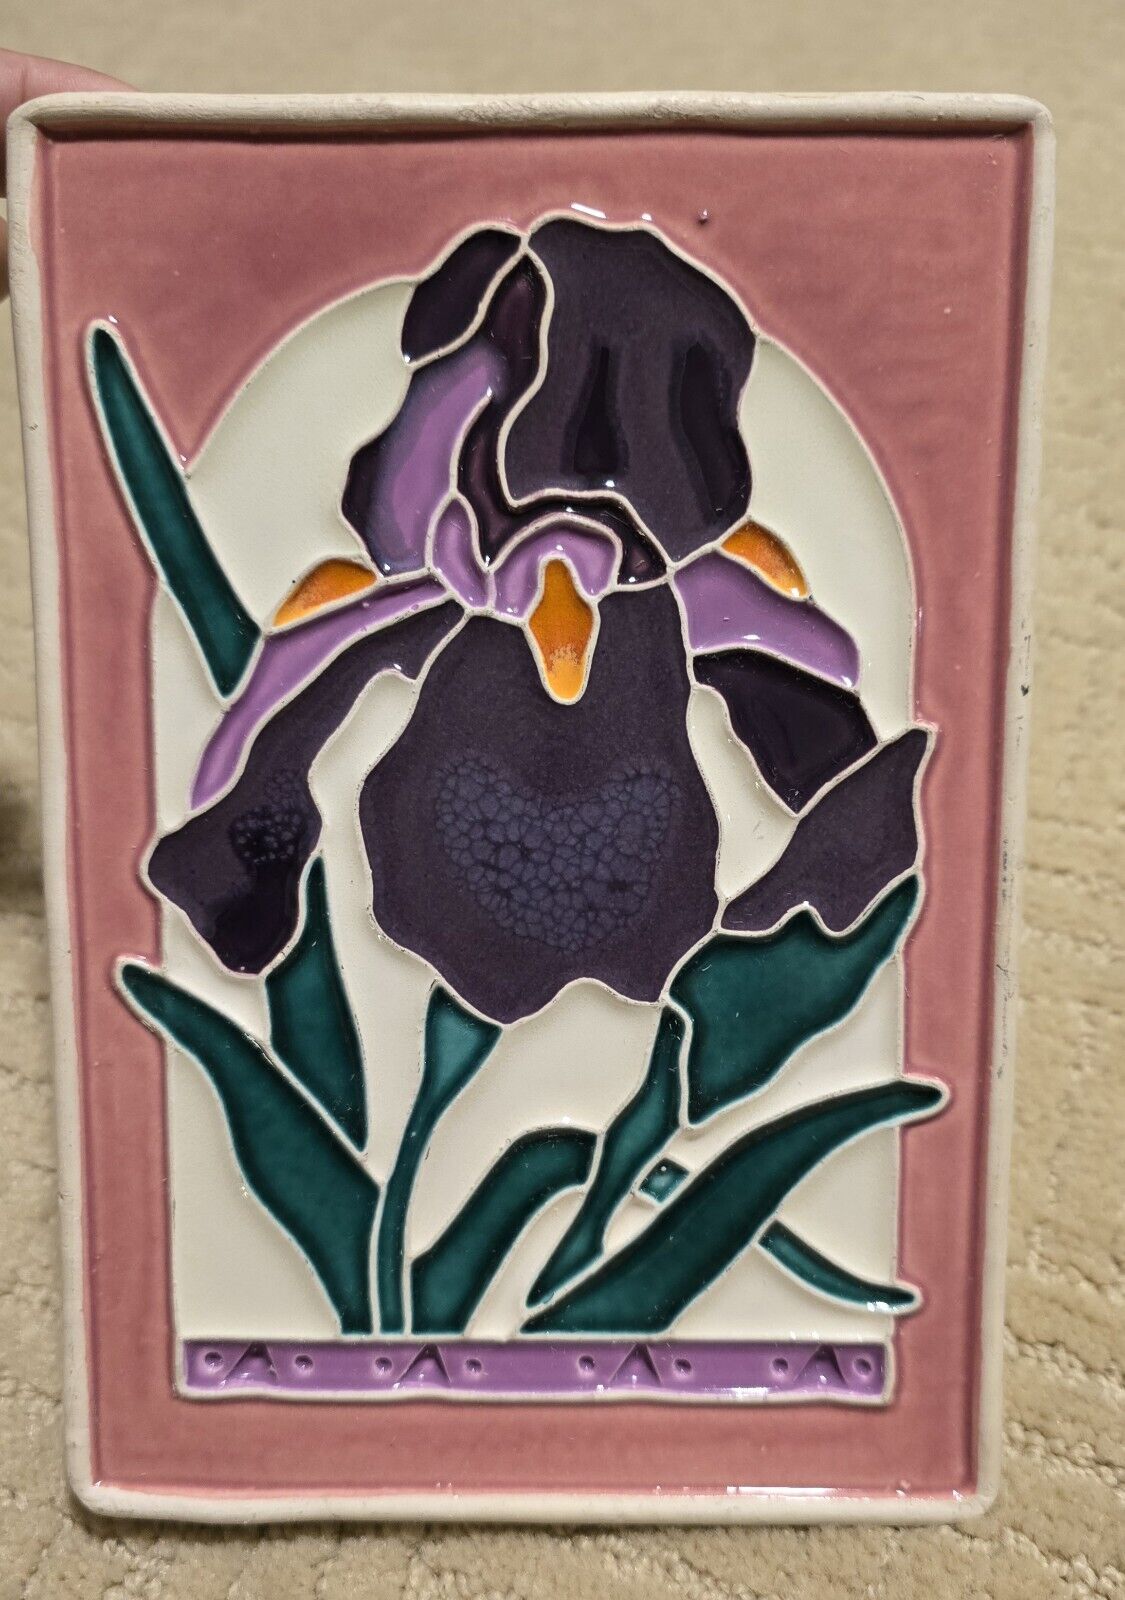 Cindy Wallace Flower Plaque  1990 Signed Art Pottery Wall Plaque 8 x 5.5\